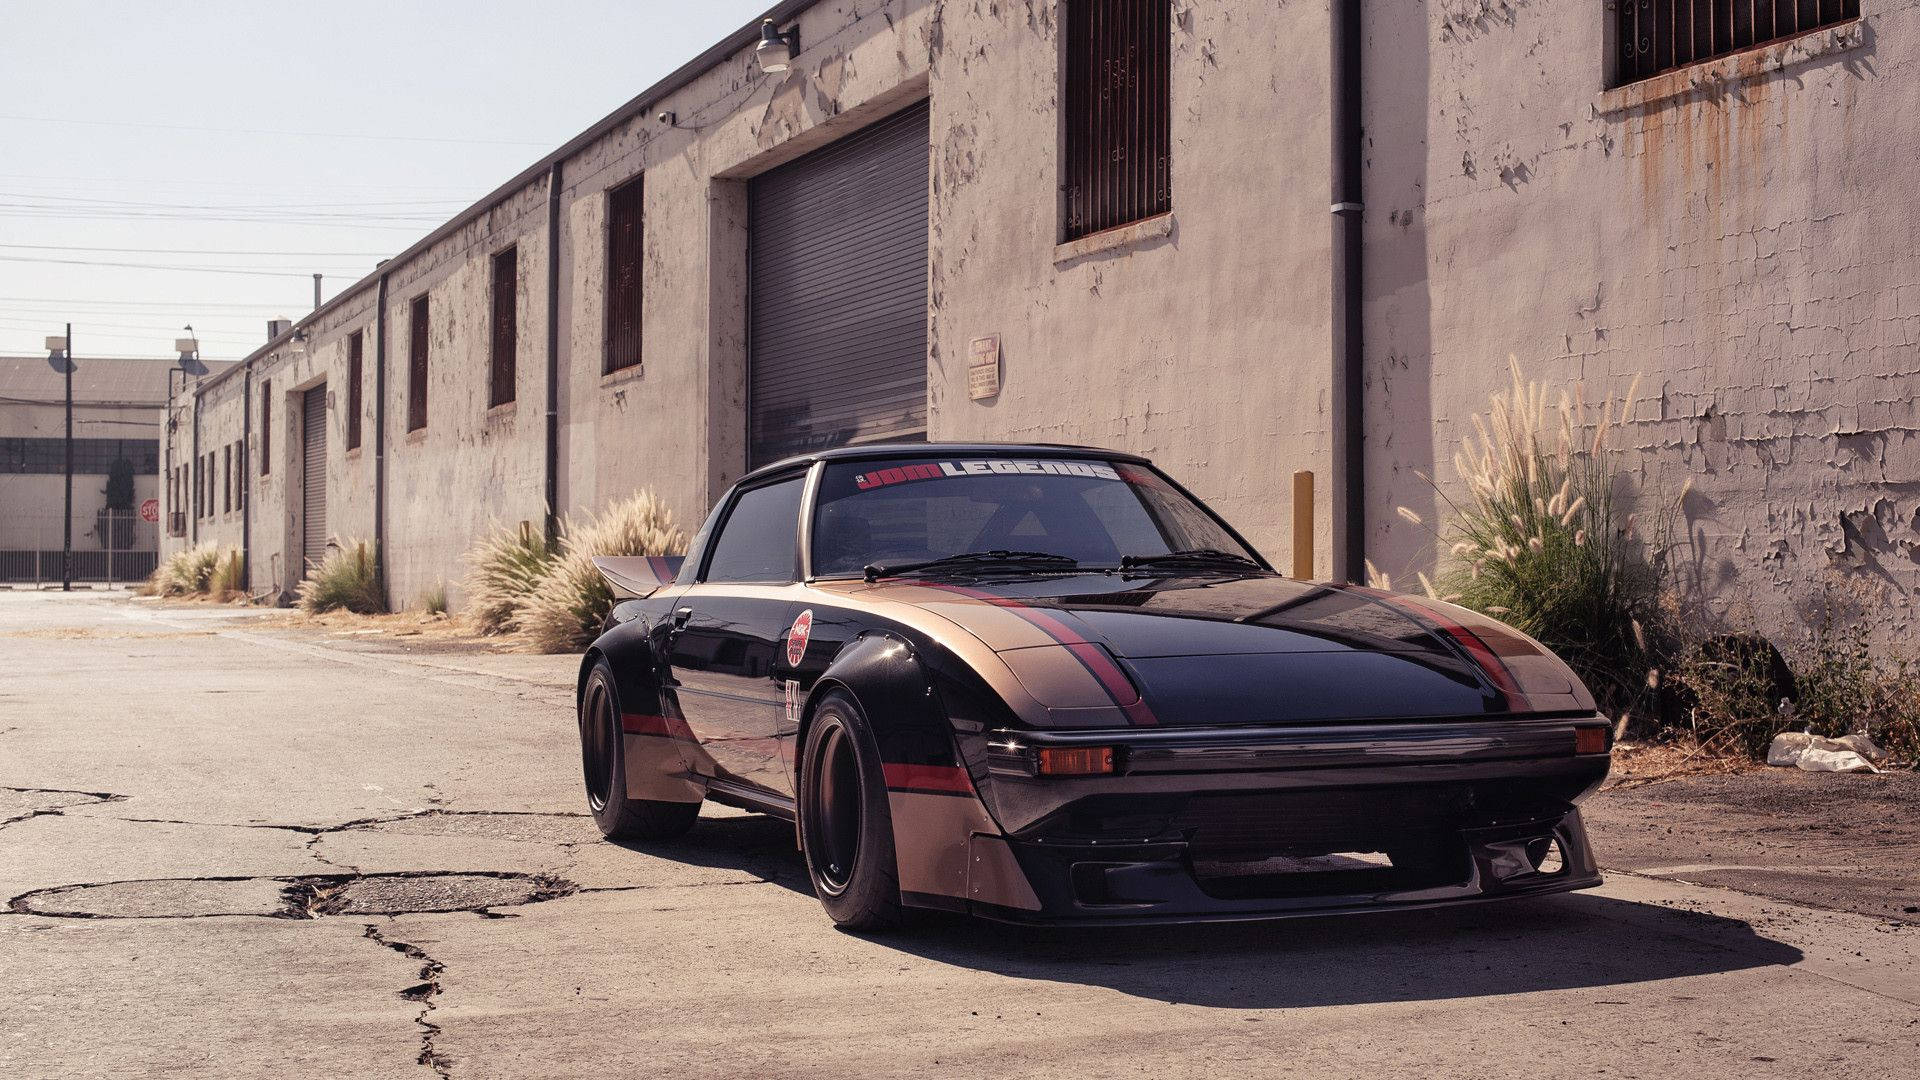 RX-7 legends stand out amongst the crowd Wallpaper